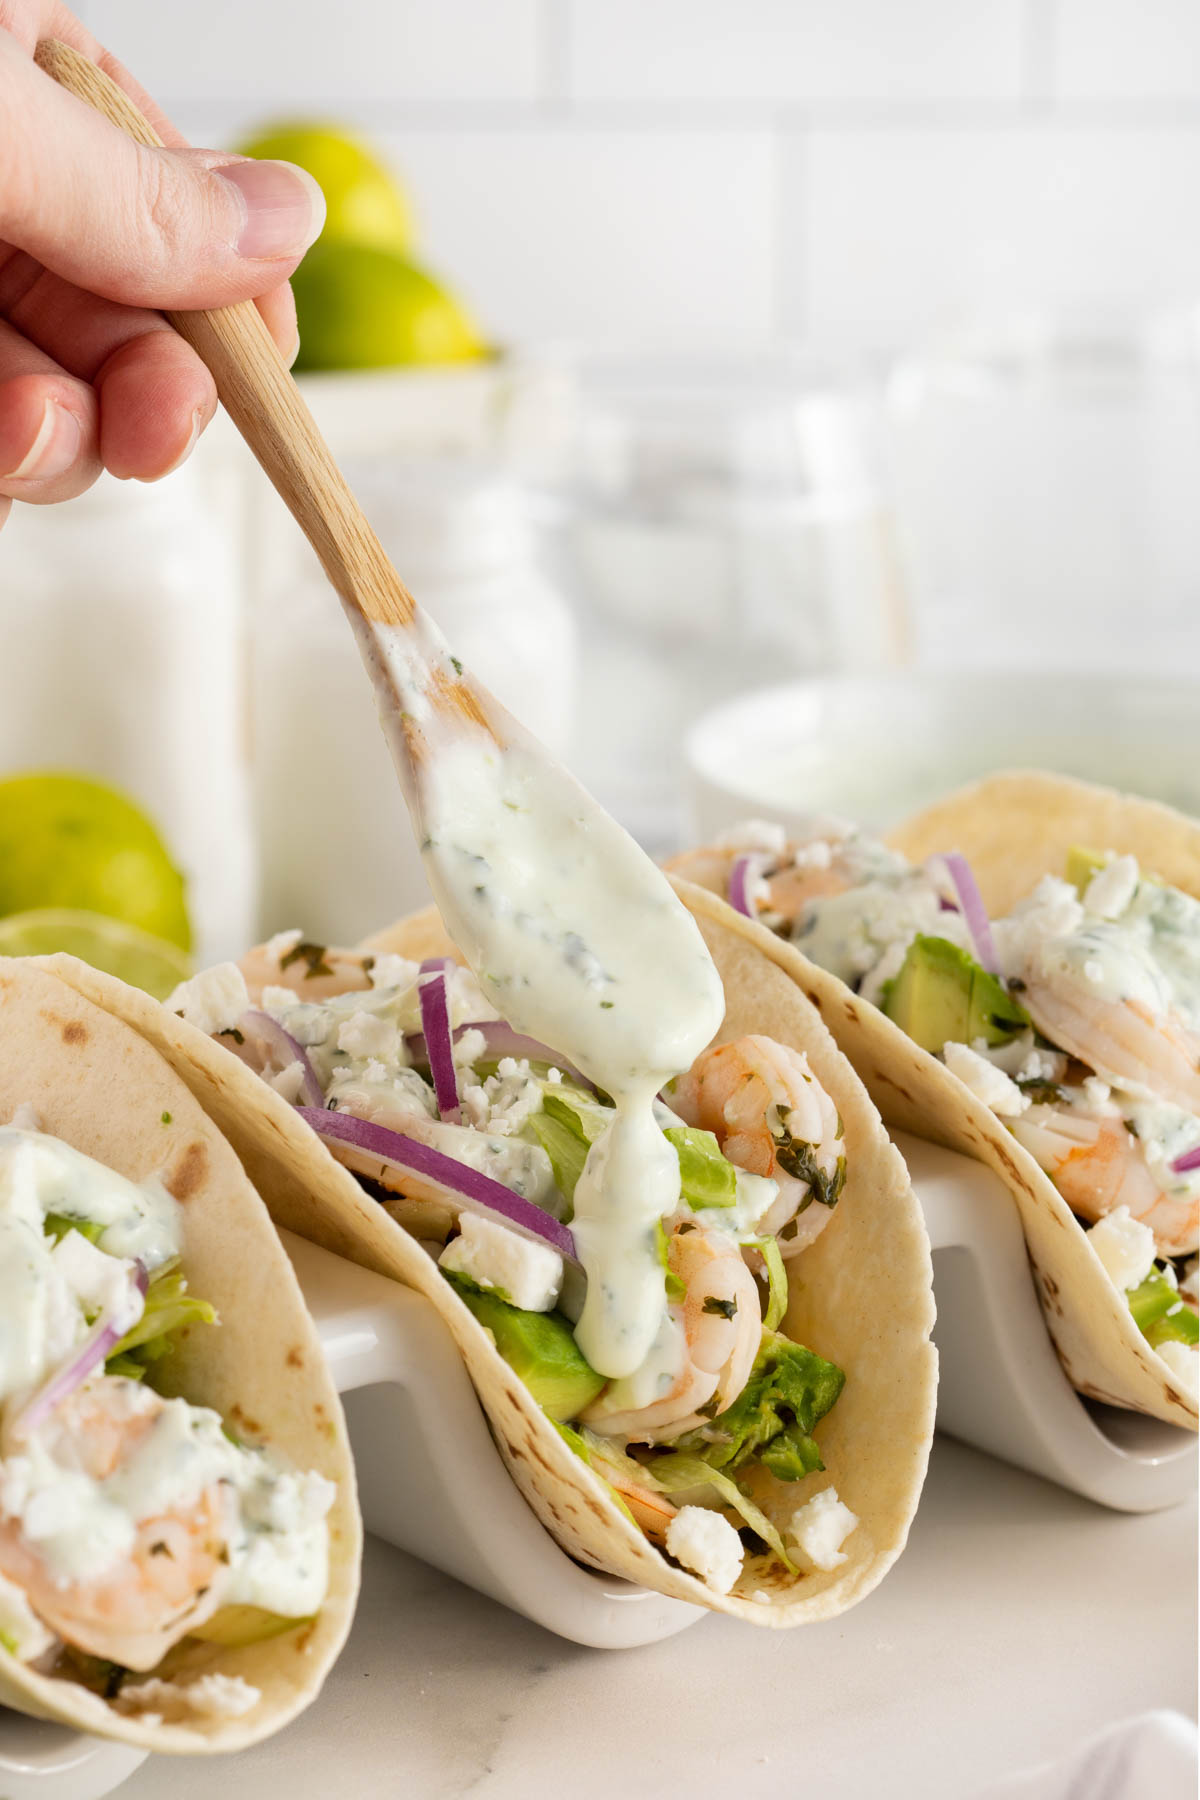 A person is drizzling cilantro lime sauce over shrimp tacos.